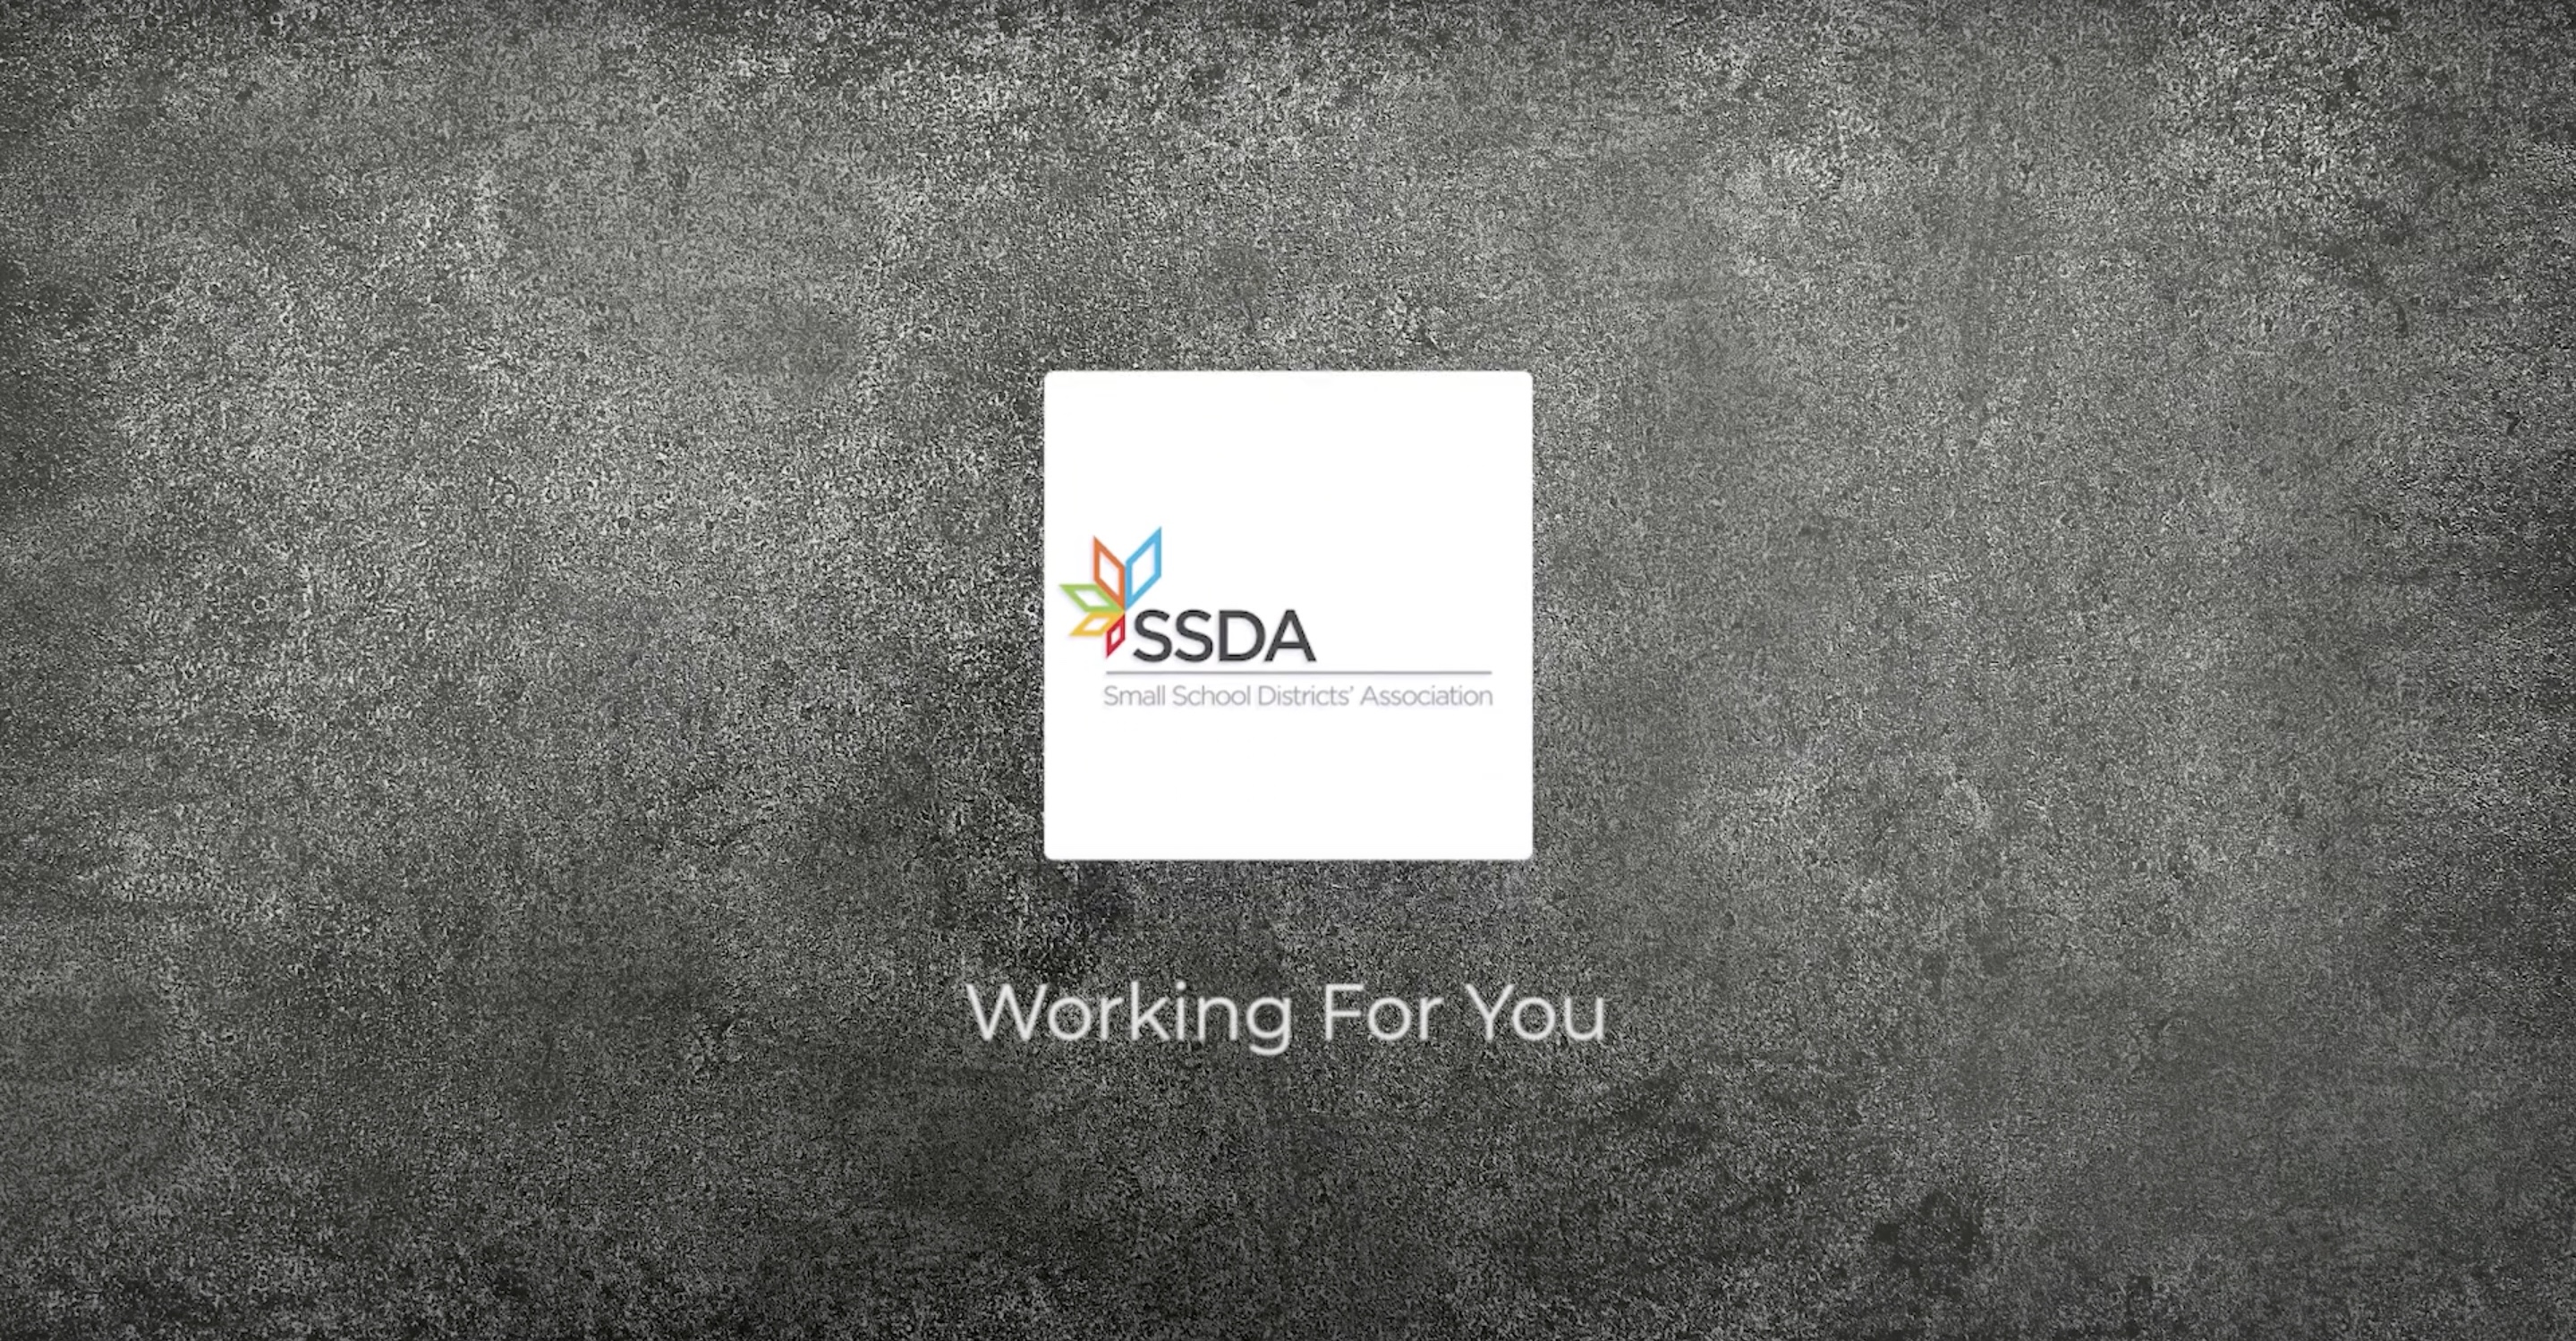 why is ssda important to you?